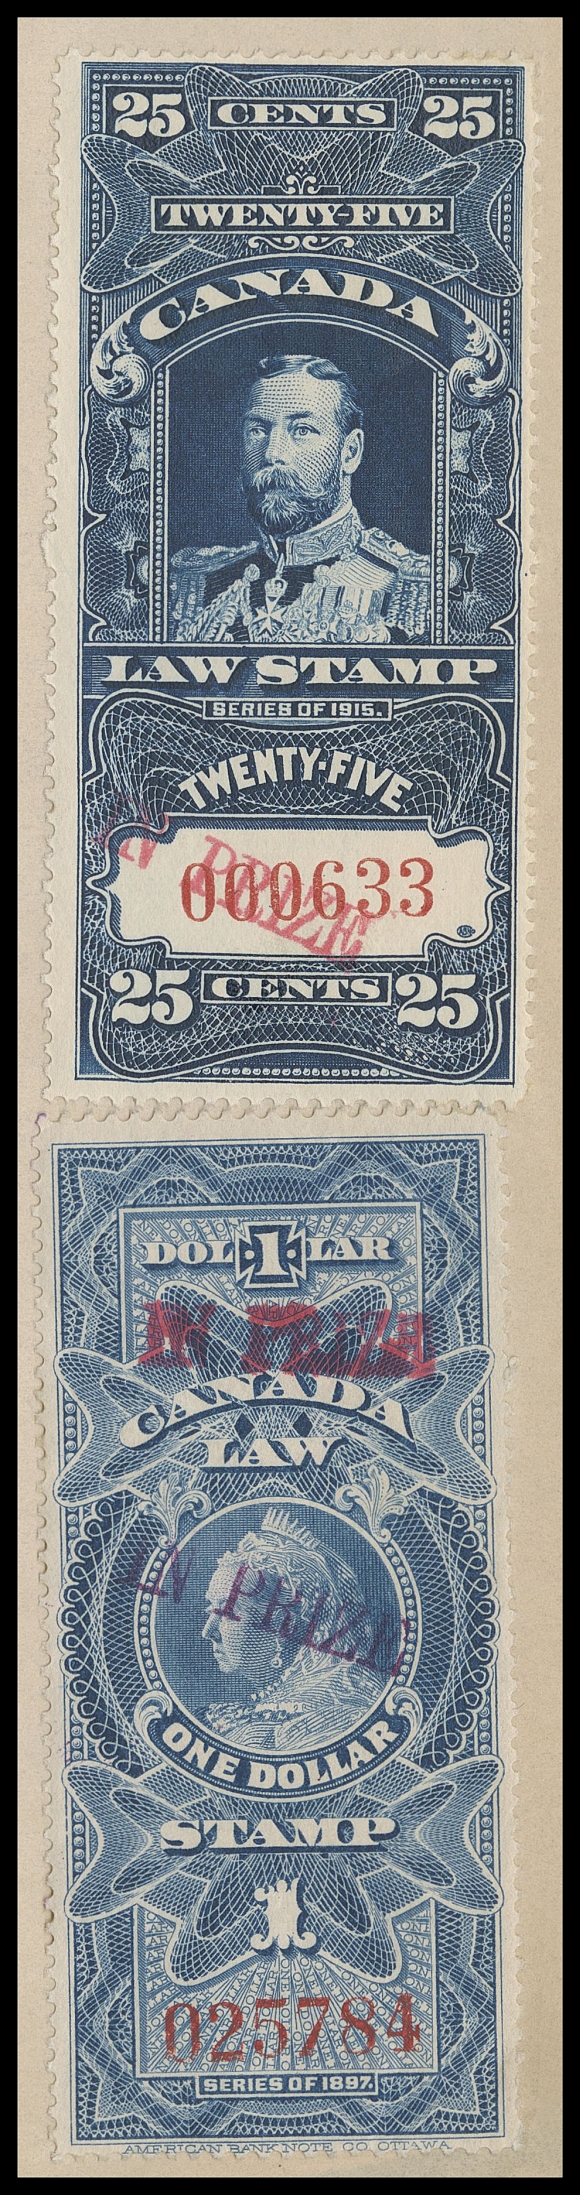 CANADA REVENUES (FEDERAL)  FSC30b, 31,Two singles handstamped "IN PRIZE" in red, former with DOUBLE OVERPRINT (one in red and one in purple), serial numbers "025784" and "000633"; both affixed uncancelled and unpunched to "The Oregon" document, Exchequer Court IN PRIZE handstamp at top with manuscript "Filed 20th June 1917". An exceptional "IN PRIZE" document in an excellent state of preservation, VF (Cat. value for two stamps)
